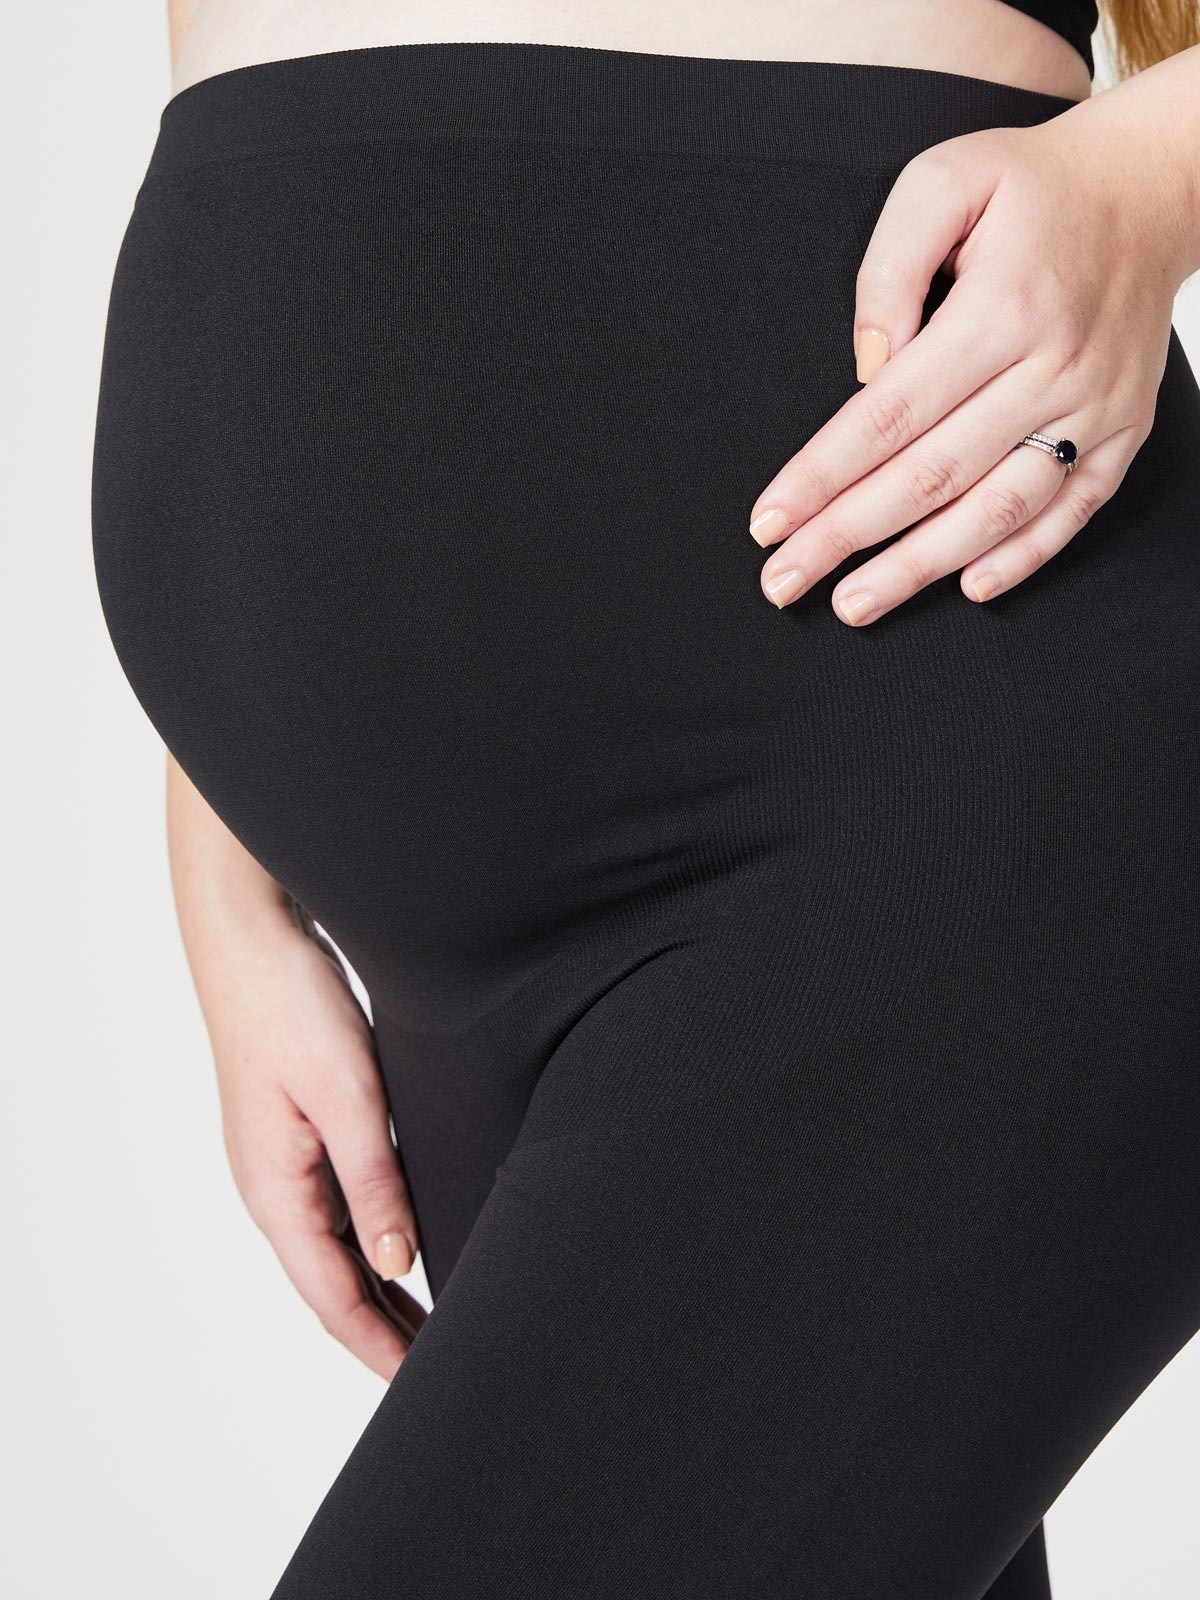 Buttery Soft Full Length Solid Maternity Leggings – Missing Piece